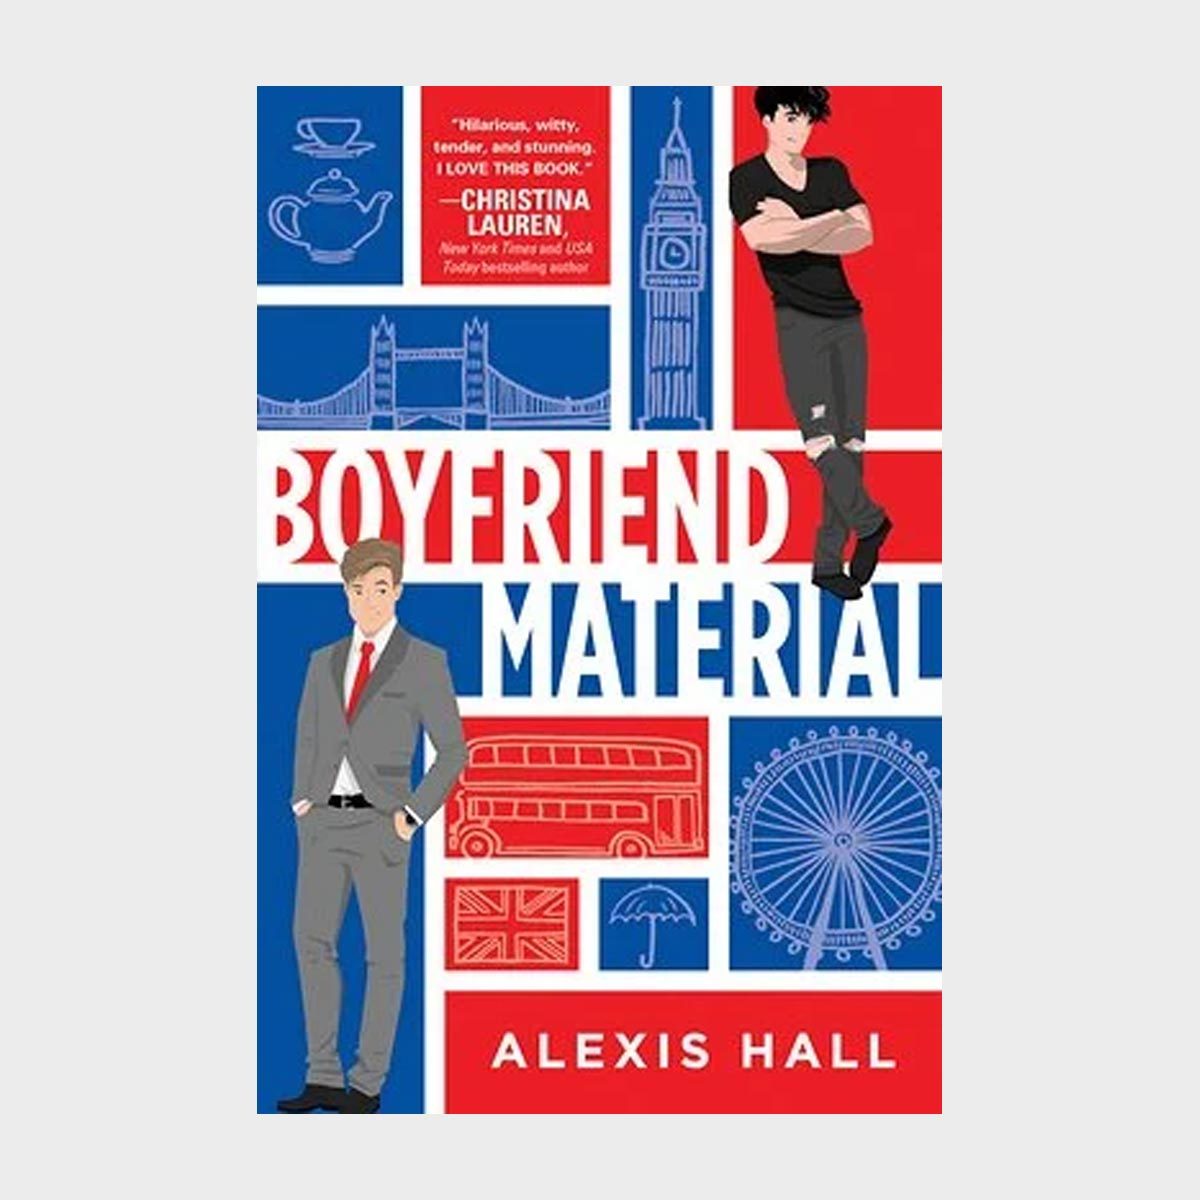 <p><strong>Series starter: </strong><a href="https://bookshop.org/p/books/boyfriend-material-alexis-hall/13197778" rel="noopener noreferrer"><em>Boyfriend Material</em></a></p> <p><strong>What you're in for: </strong>Fake dating and big-time banter</p> <p>First released in 2020, Alexis Hall's hilarious queer rom-com introduces readers to Luc O'Donnell, son of famous parents and a target for scathing tabloid headlines that do nothing to improve his reputation. Oliver Blackwood is a perfectly respectable gentleman and kind human. In other words, he's the perfect fake boyfriend to help improve Luc's appearance in the public eye. But will fake feelings soon turn real? The third of Hall's legitimately <a href="https://www.rd.com/list/funniest-books-of-all-time/" rel="noopener noreferrer">funny books</a> in this series, <em>Father Material</em>, is expected to come out this October.</p> <p class="listicle-page__cta-button-shop"><a class="shop-btn" href="https://bookshop.org/p/books/boyfriend-material-alexis-hall/13197778">Shop Now</a></p>